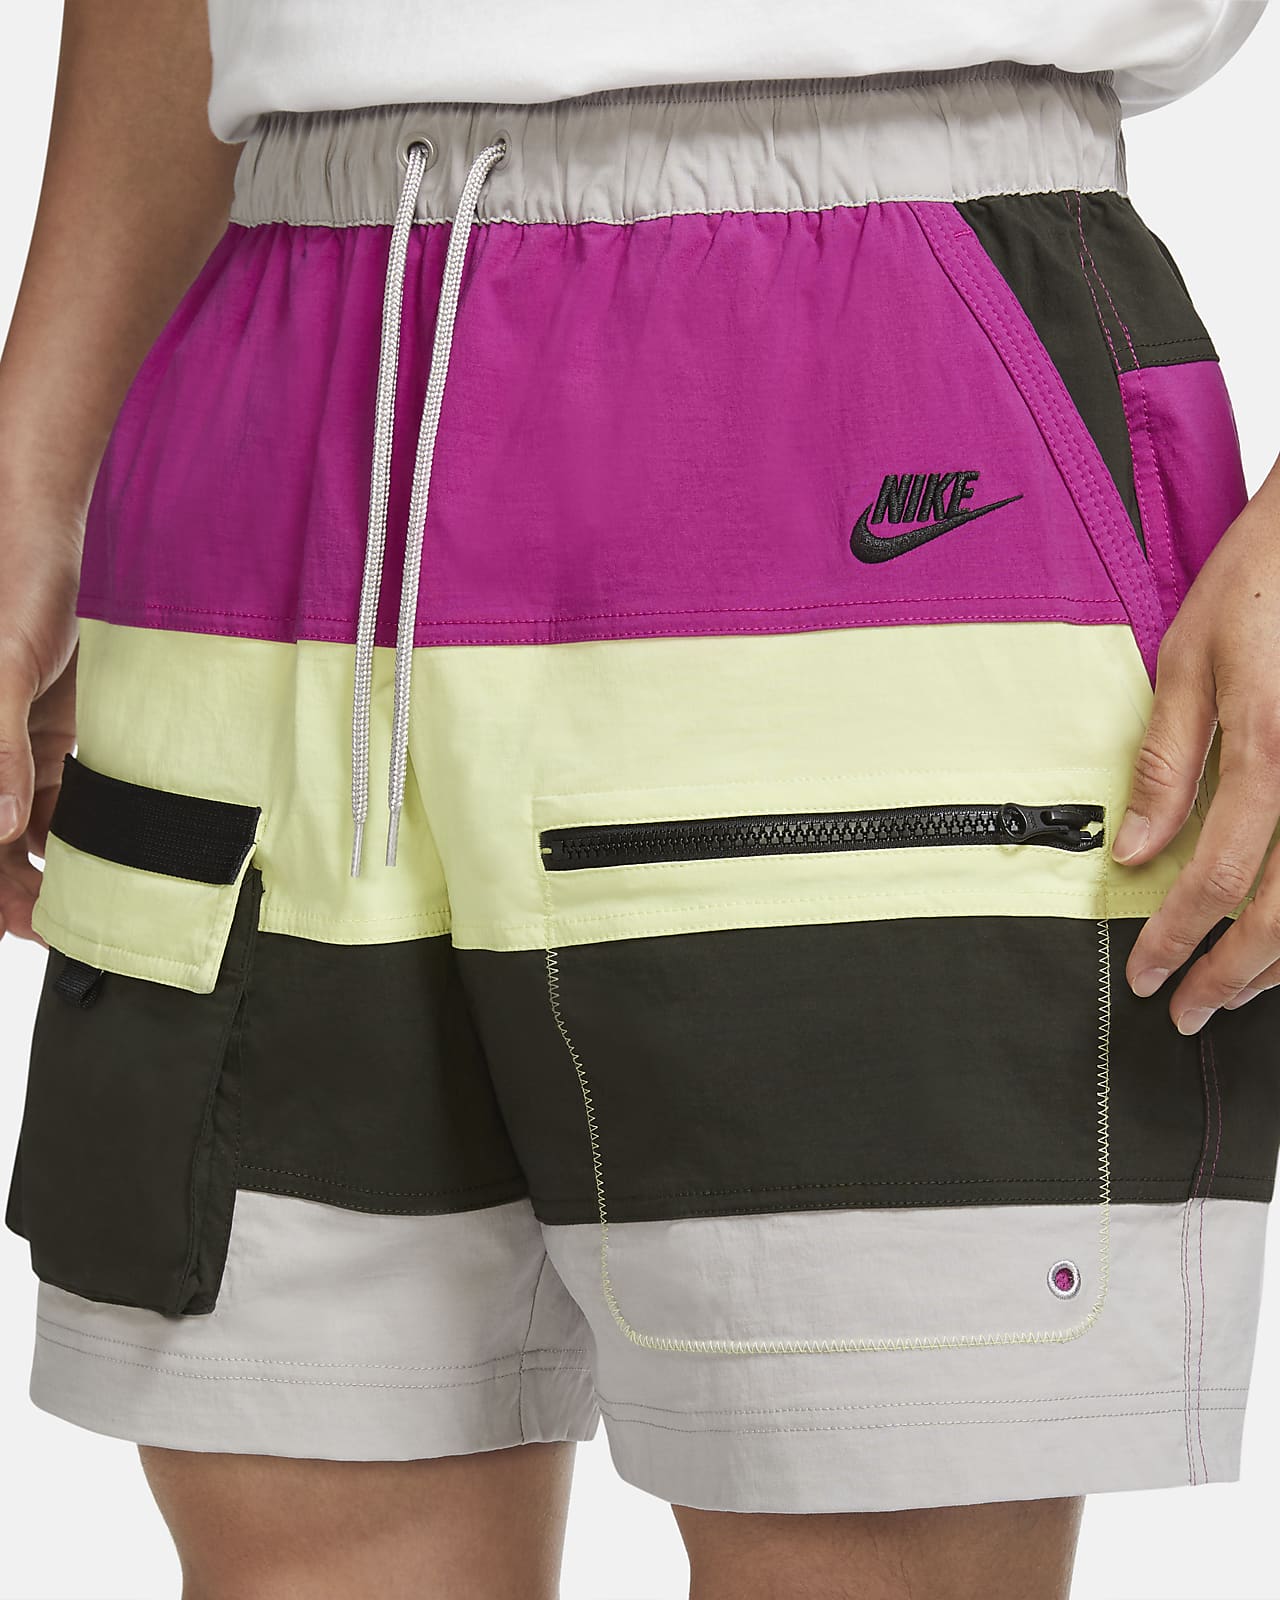 Buy > mens nike shorts with pockets > in stock